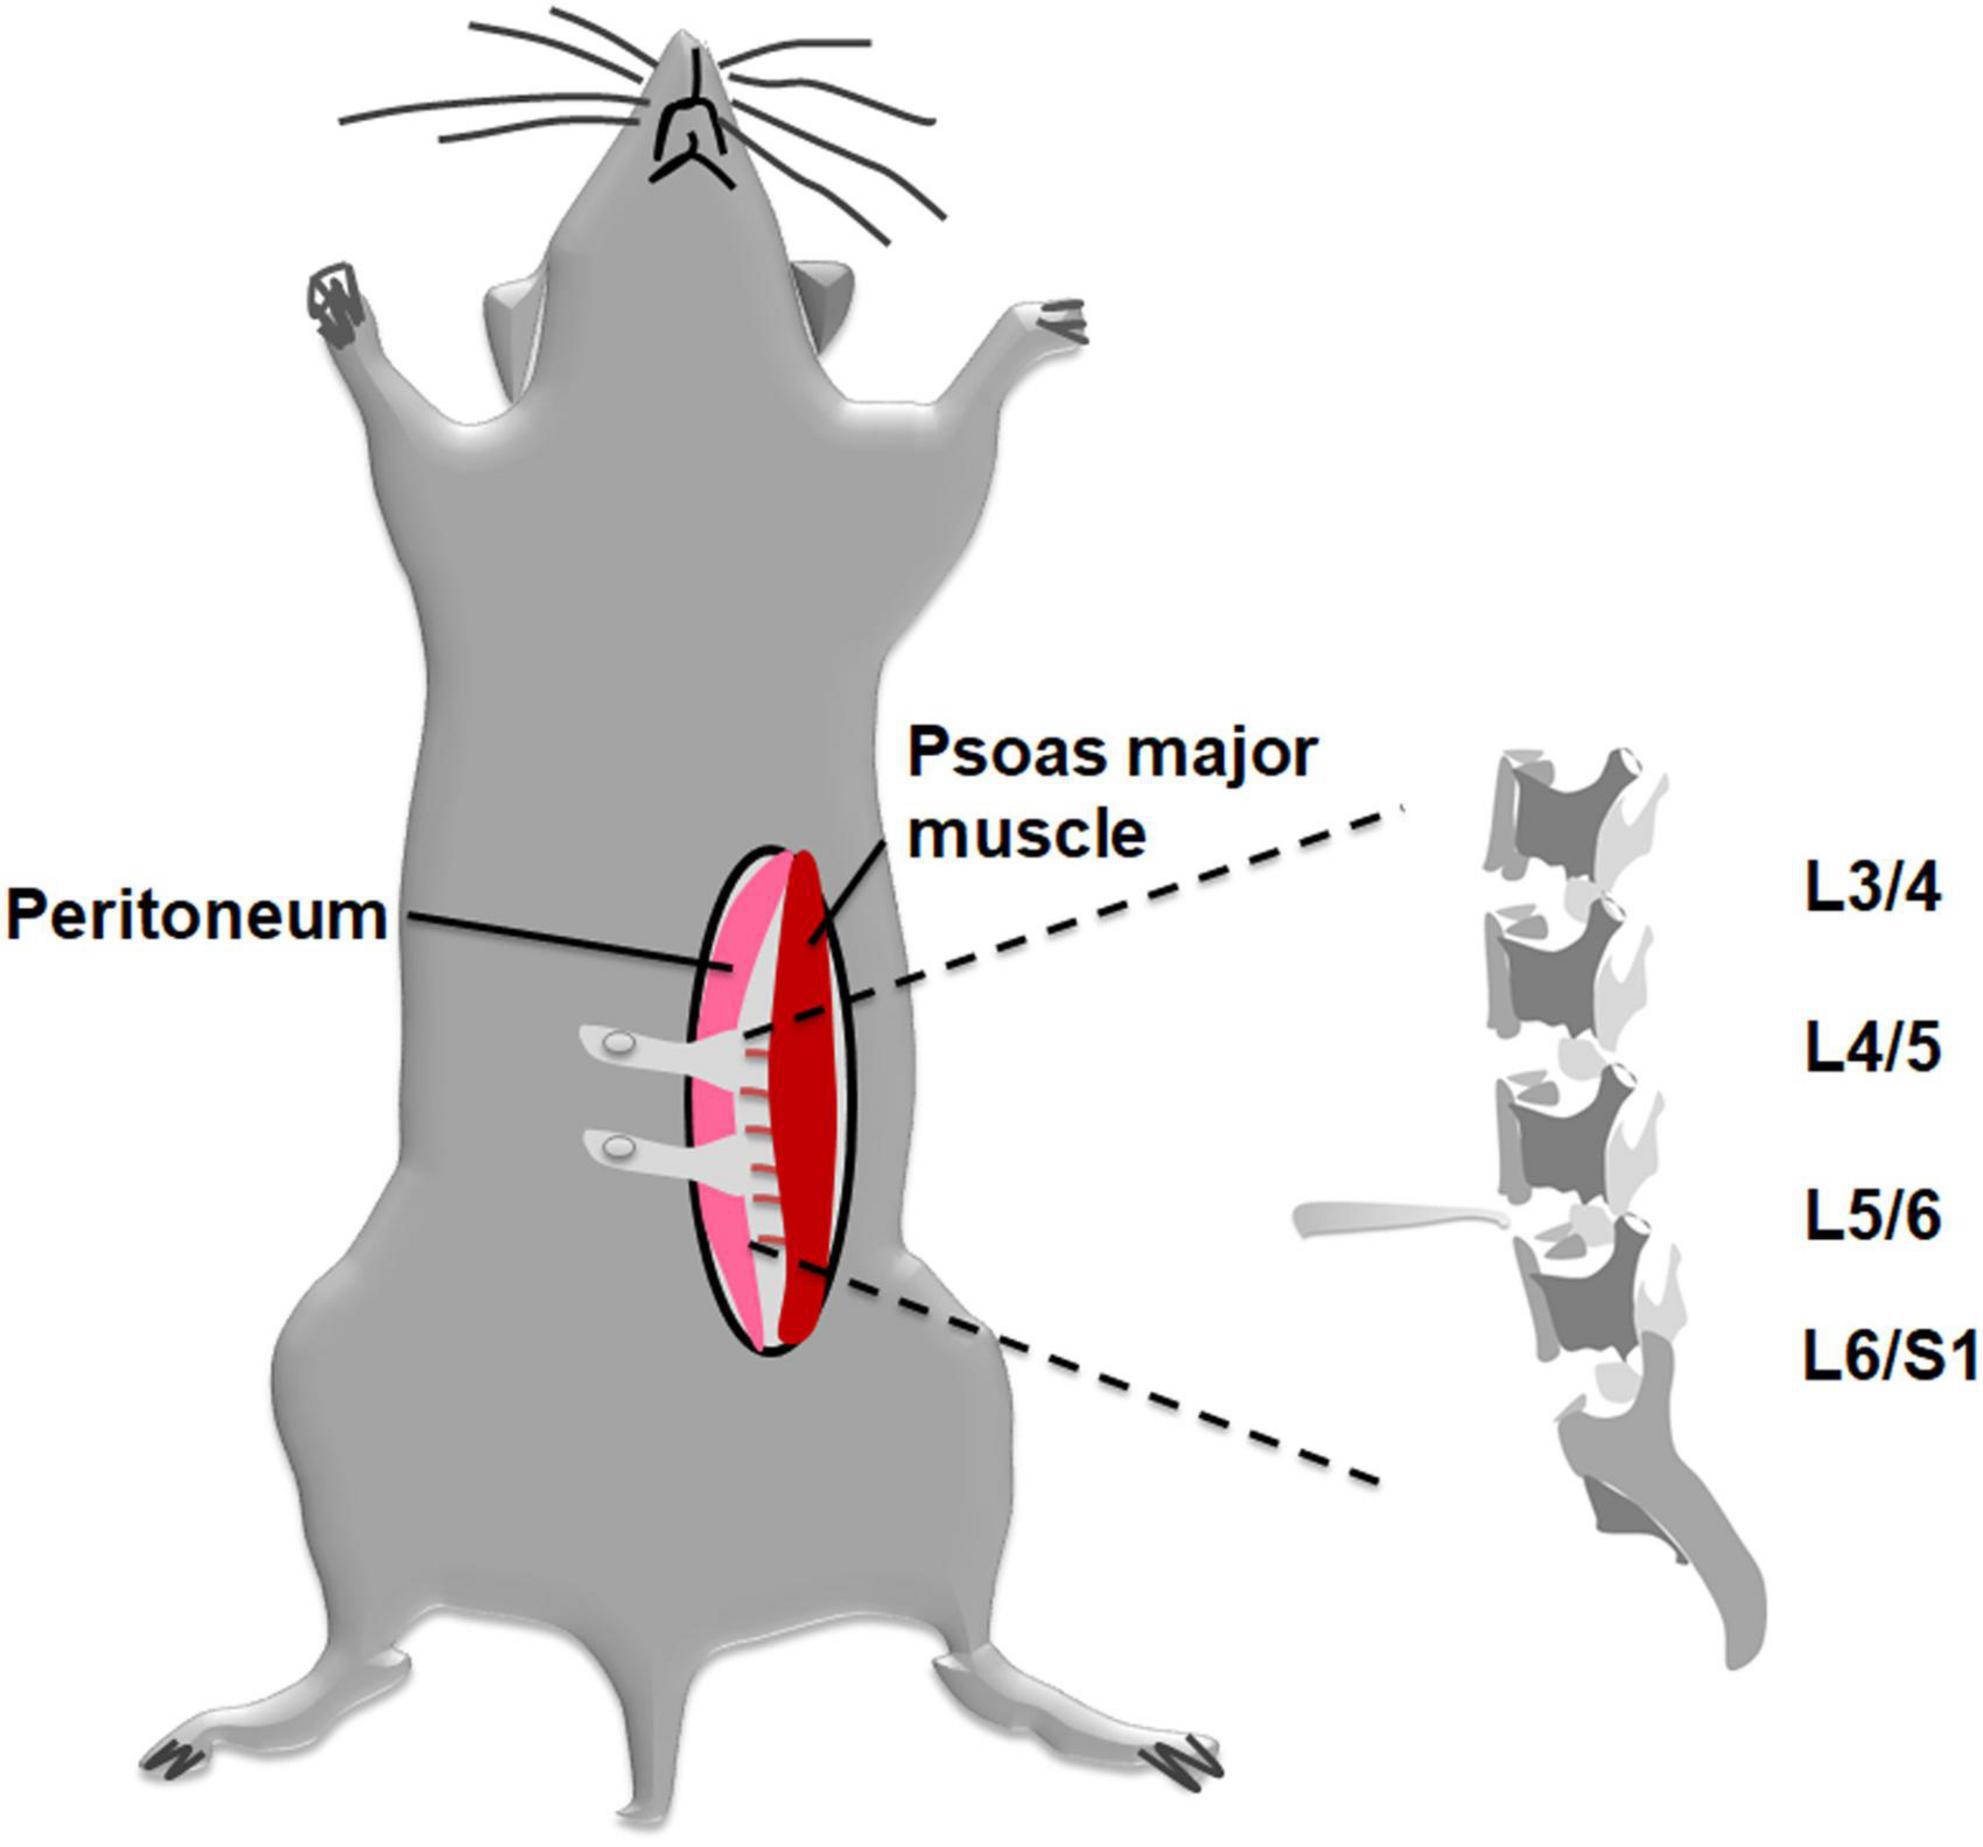 Estrogen receptor β/substance P signaling in spinal cord mediates antinociceptive effect in a mouse model of discogenic low back pain